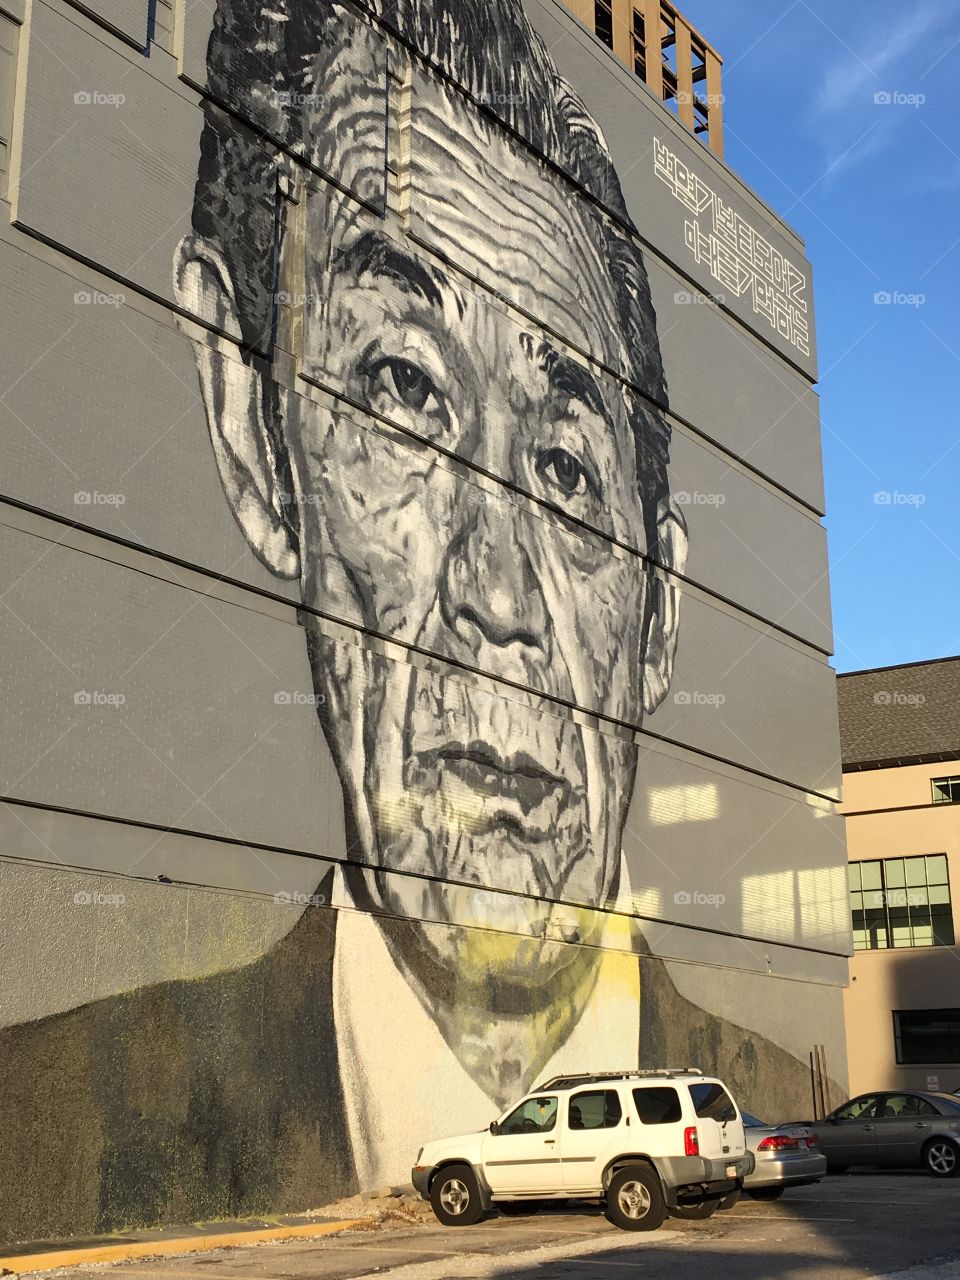 A Painting Of A Korean Man Up On A Giant Wall In The City.